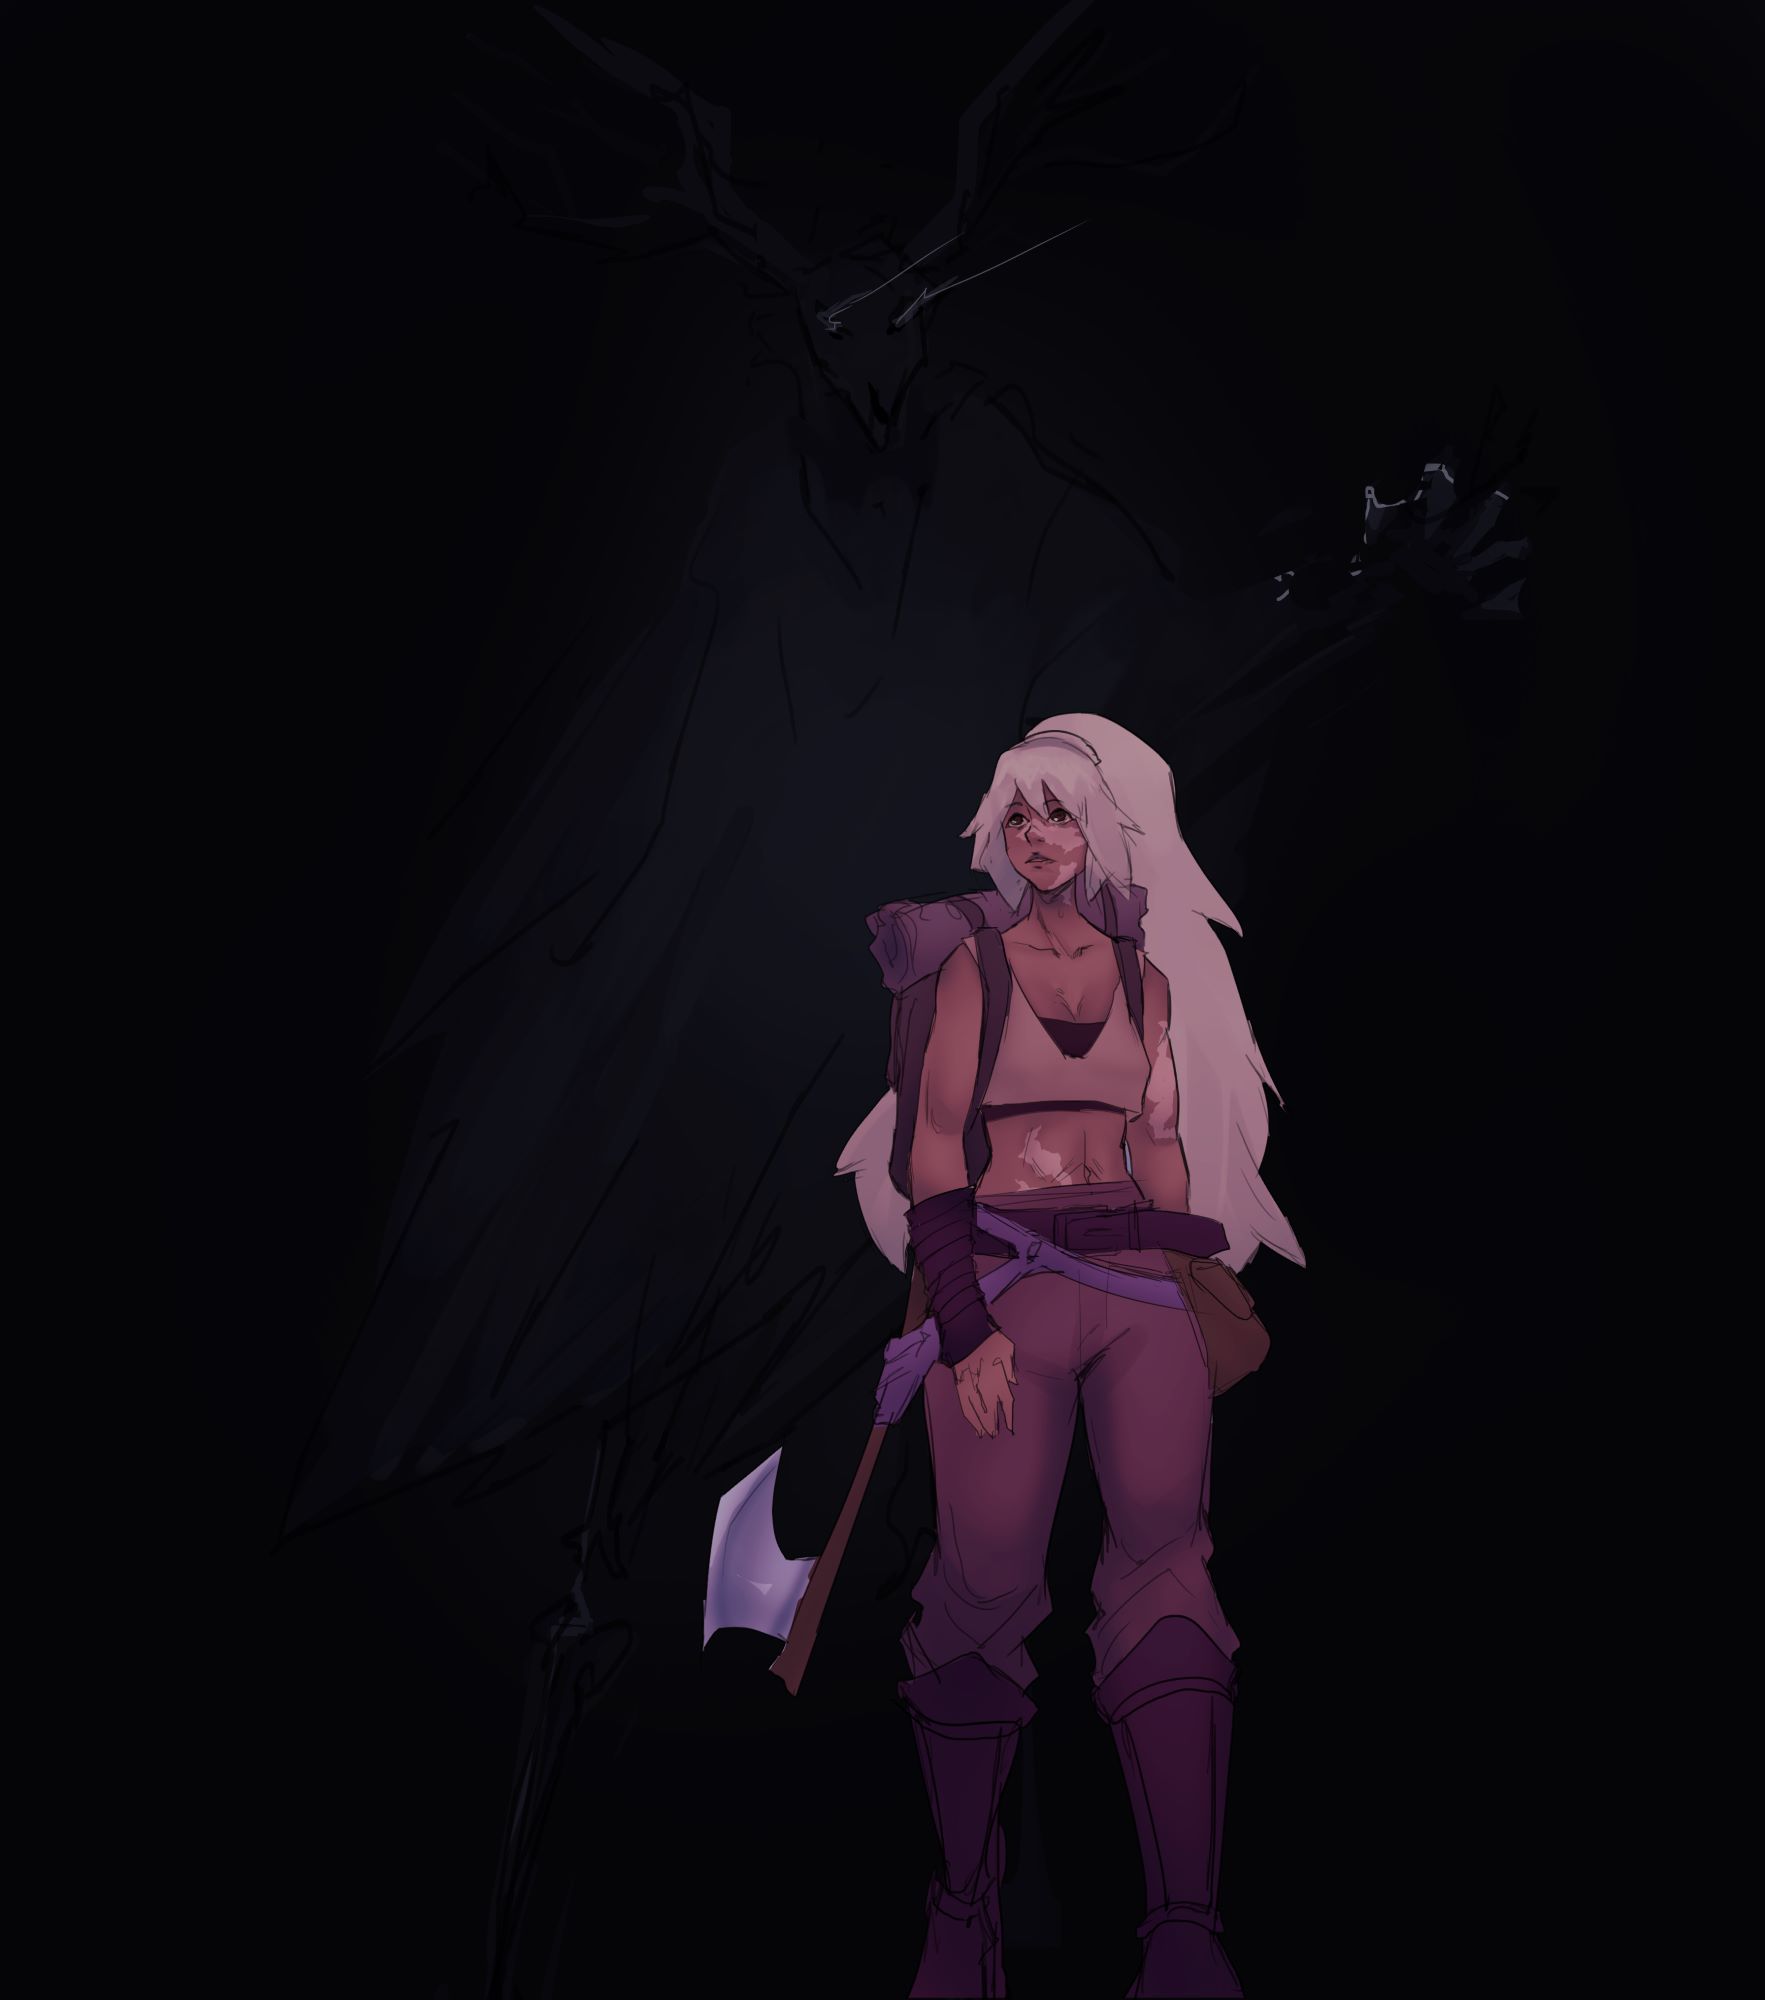 fantasy character with a shadow monster behind her